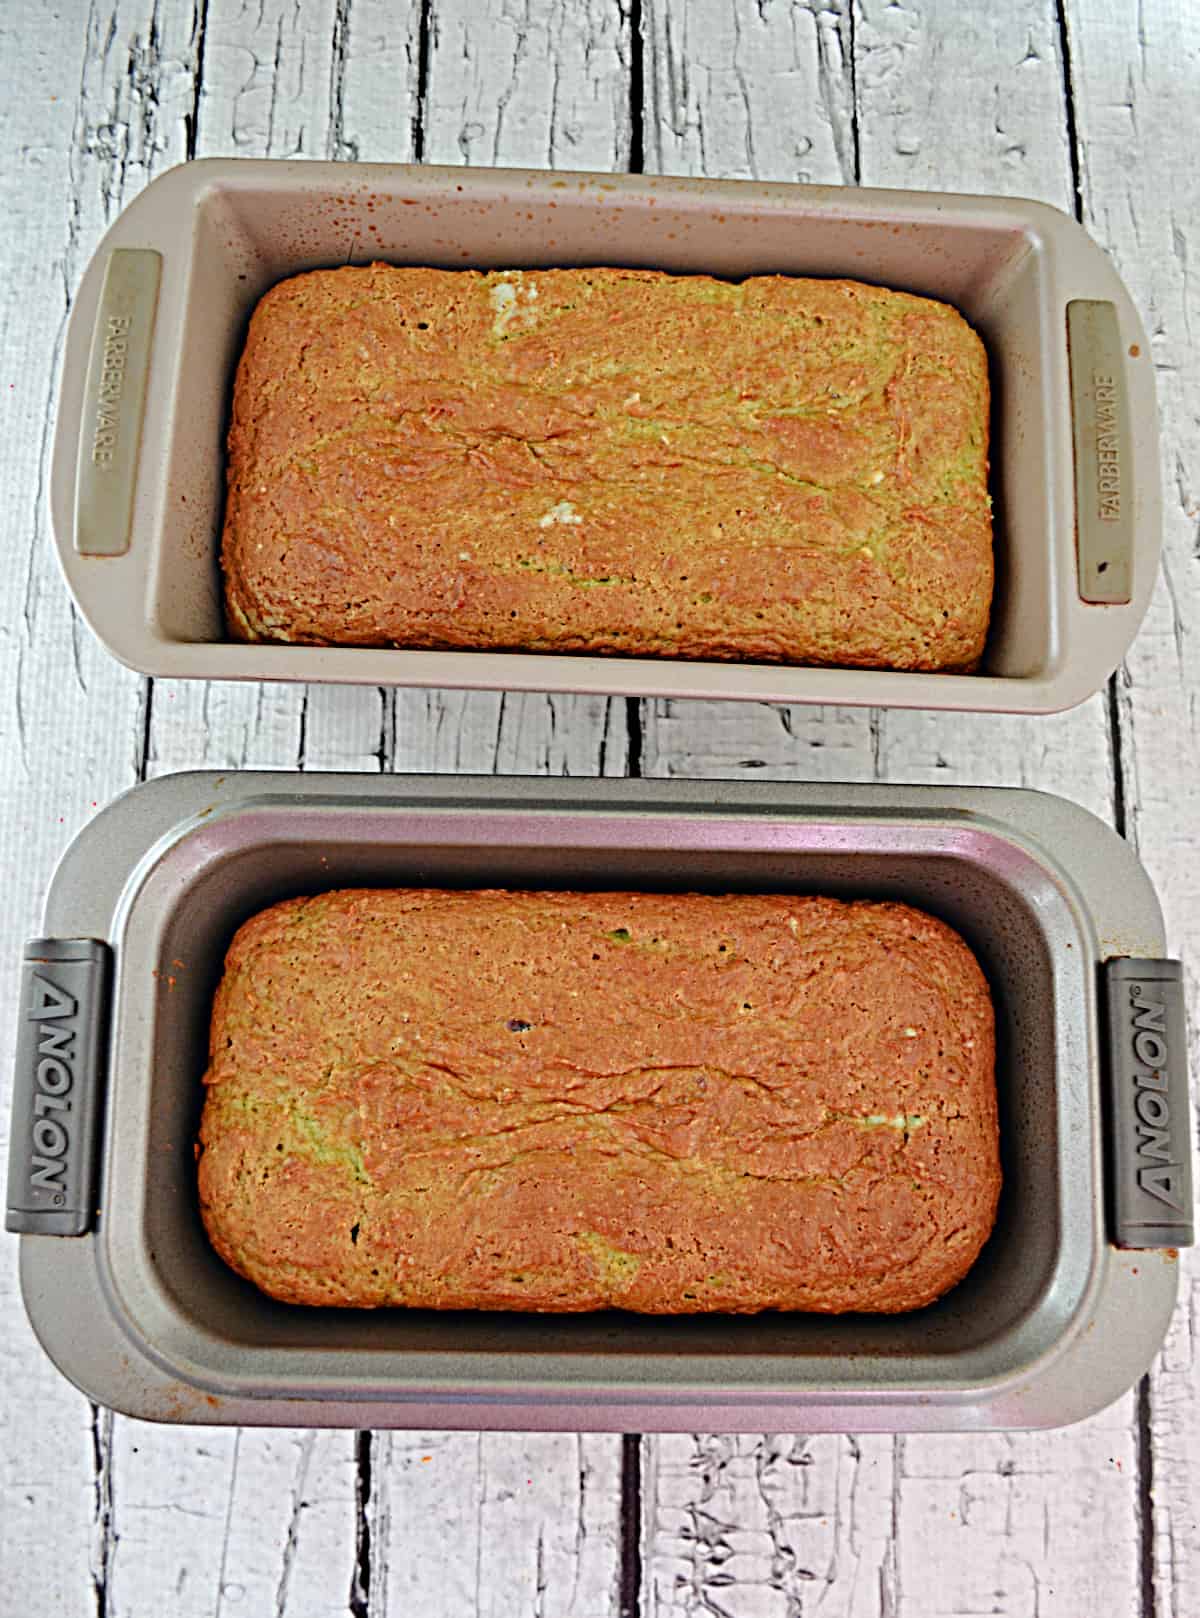 Two loaf pans with cake baked in them.